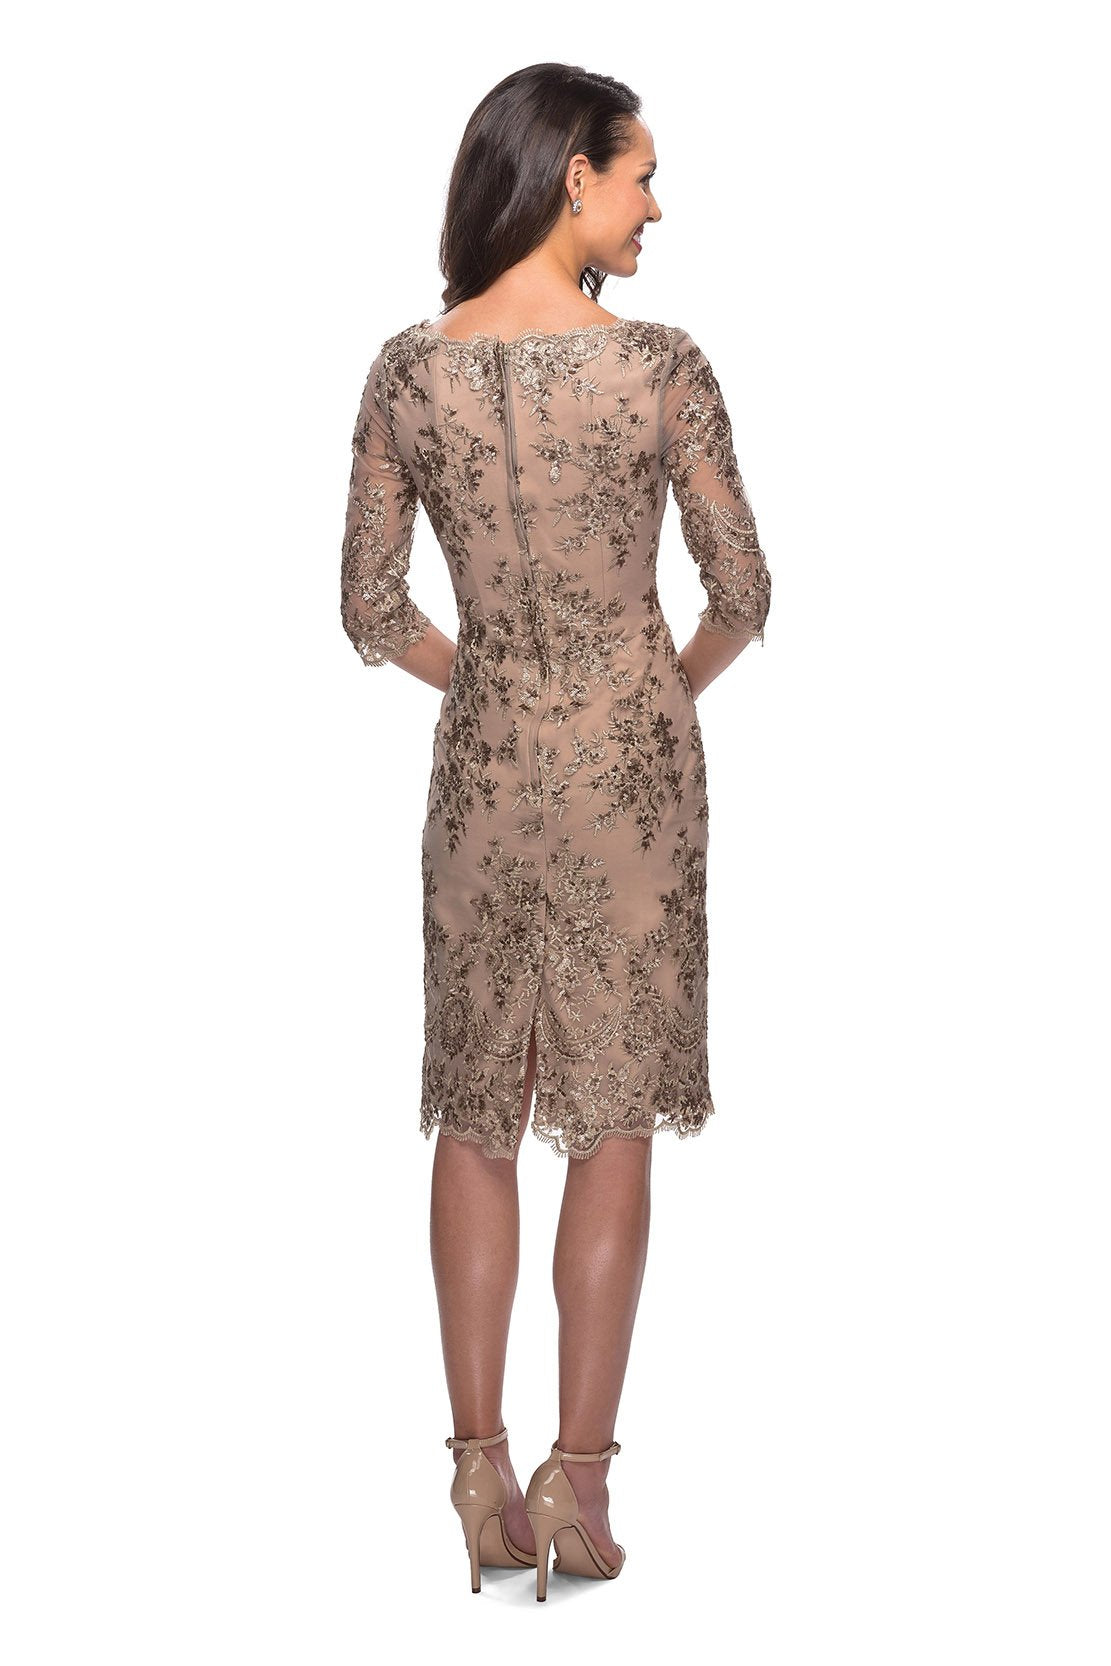 La Femme - Knee Length Quarter Sleeve Embroidered Dress 26871 In Gold and Neutral